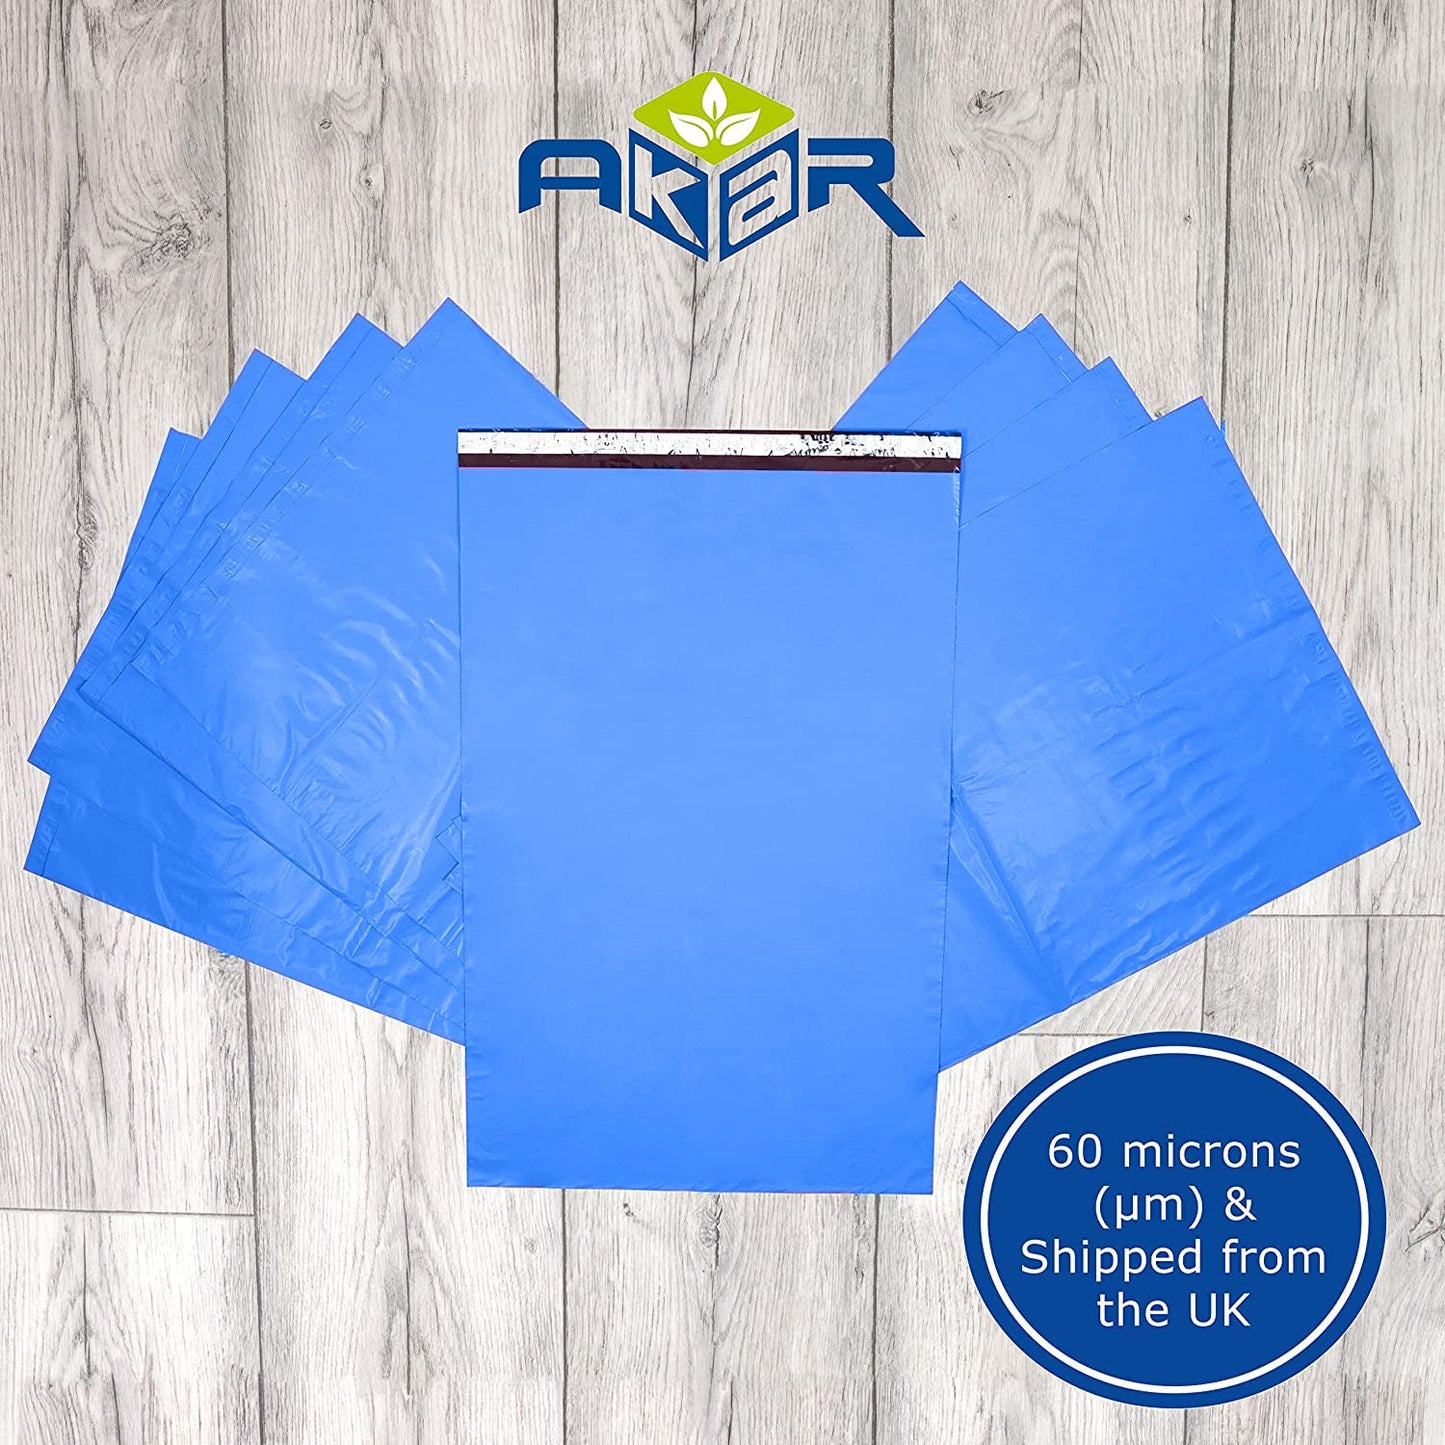 AKAR 12 x 16 Mailing Bags – Strong Posting Mail Bags 12 x 16 with Aluminium Adhesive Strip – 55 Microns – Easy Seal – Large 30 x 40cm – For Non-Fragile Items (Blue, 10 Pack)